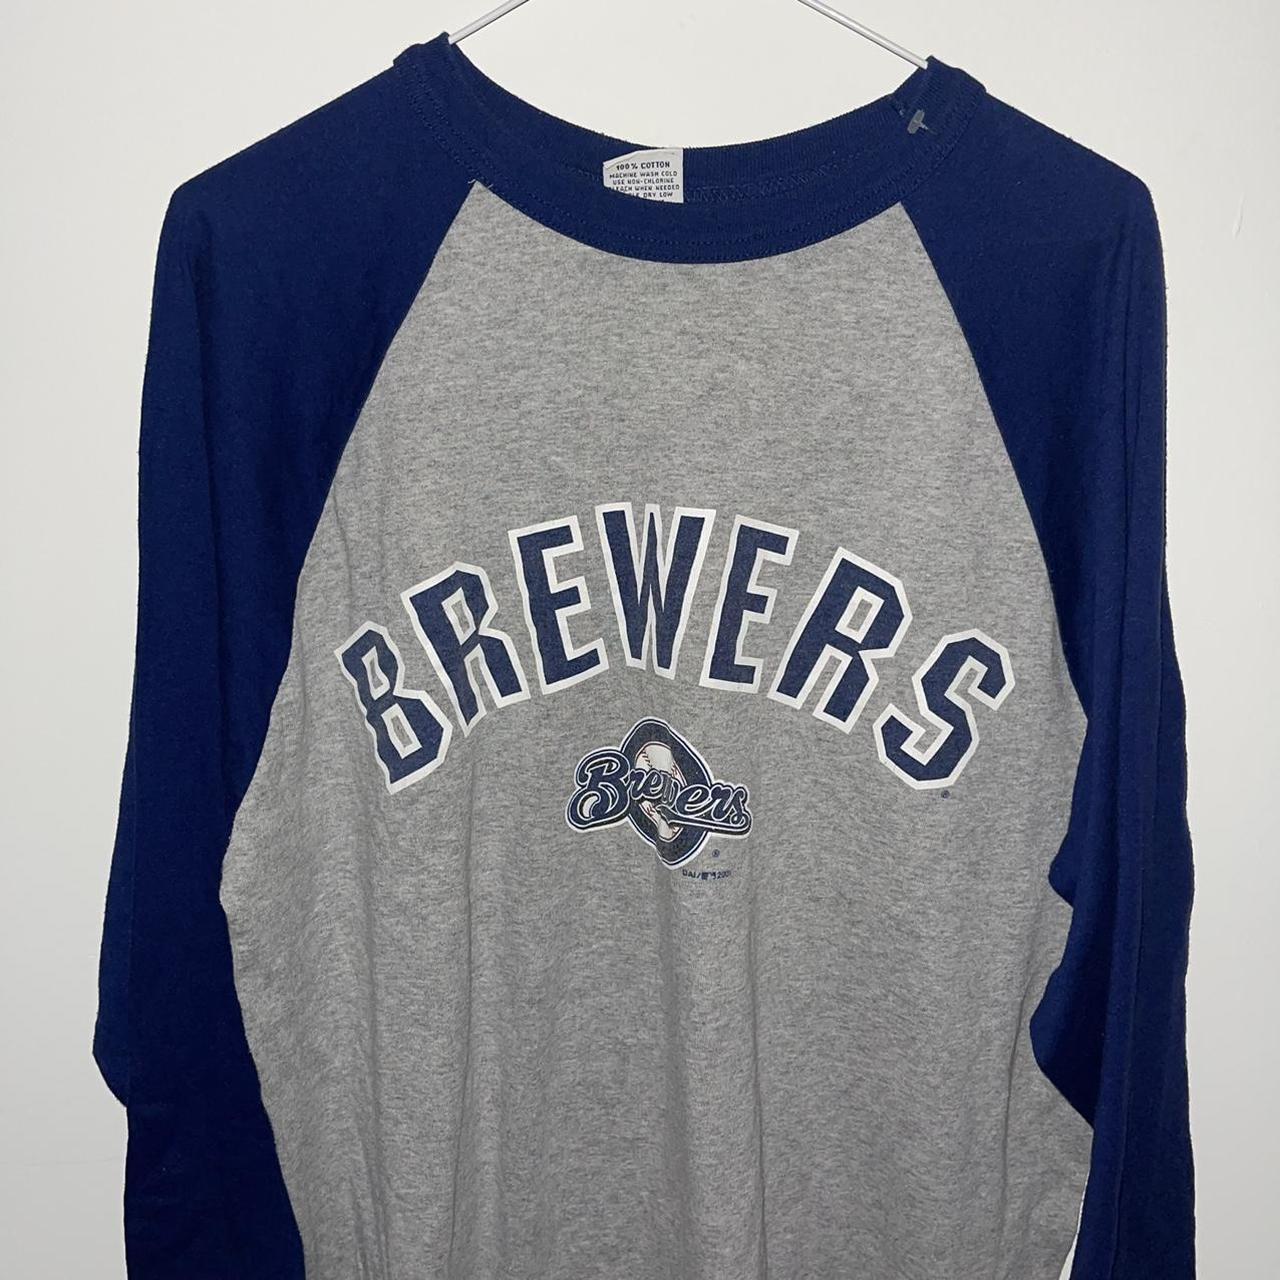 Retro Milwaukee Brewers popover jersey size XL but - Depop